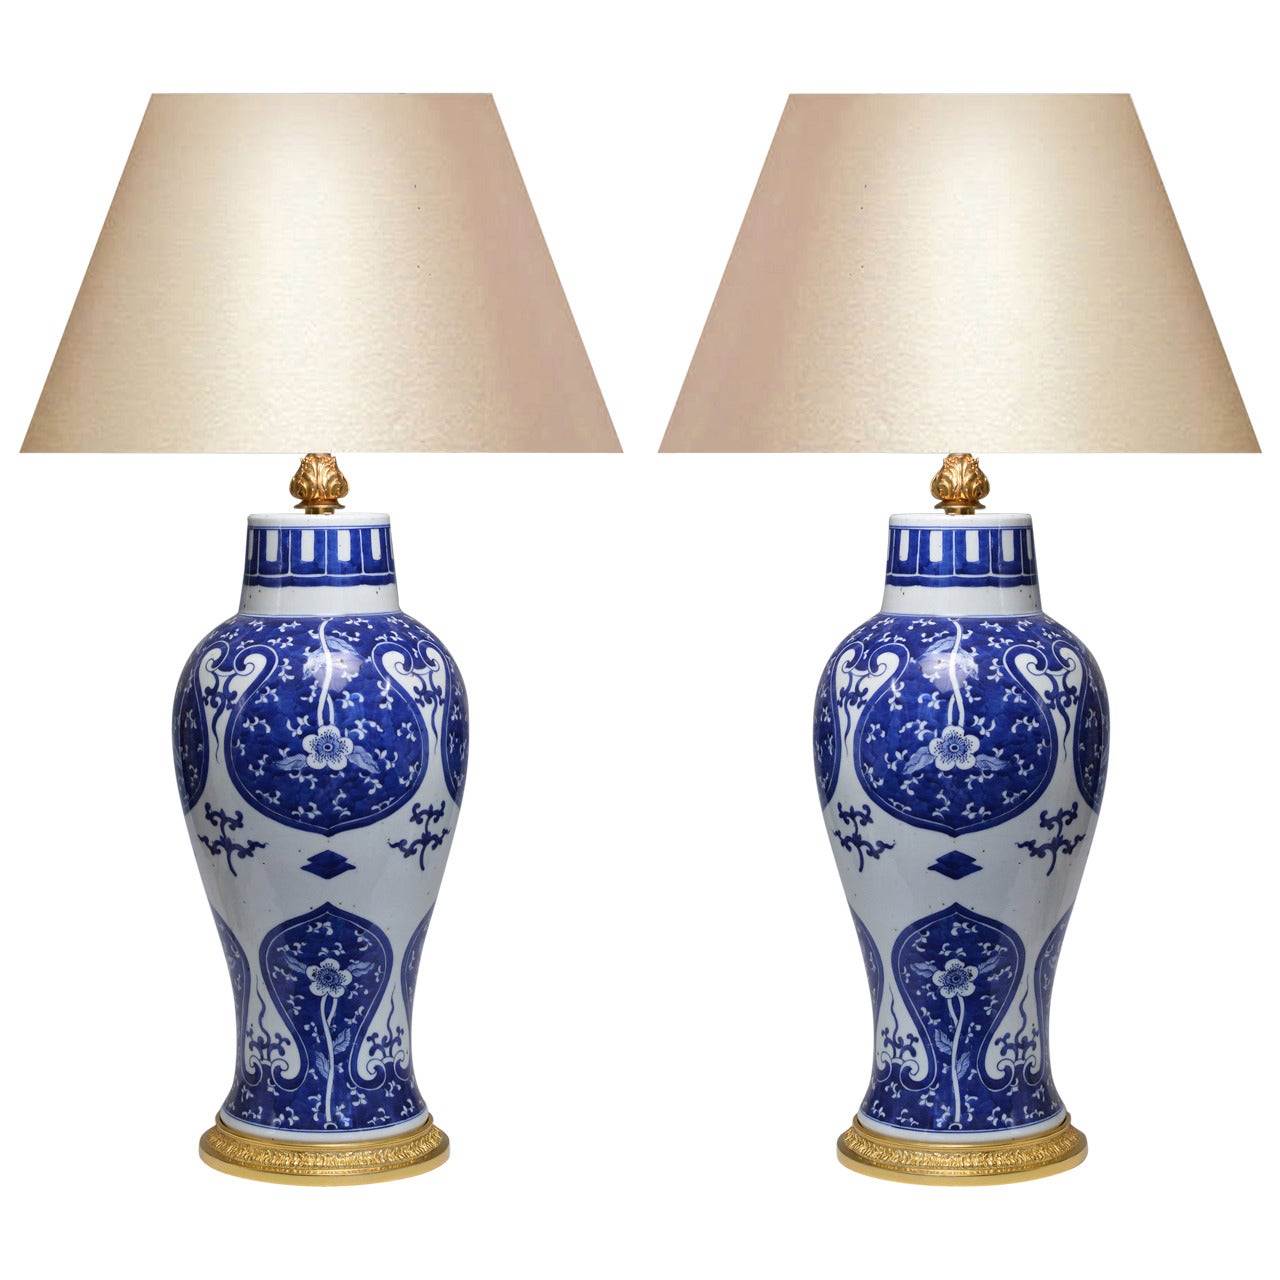 Pair of Blue and White Porcelain Lamps For Sale